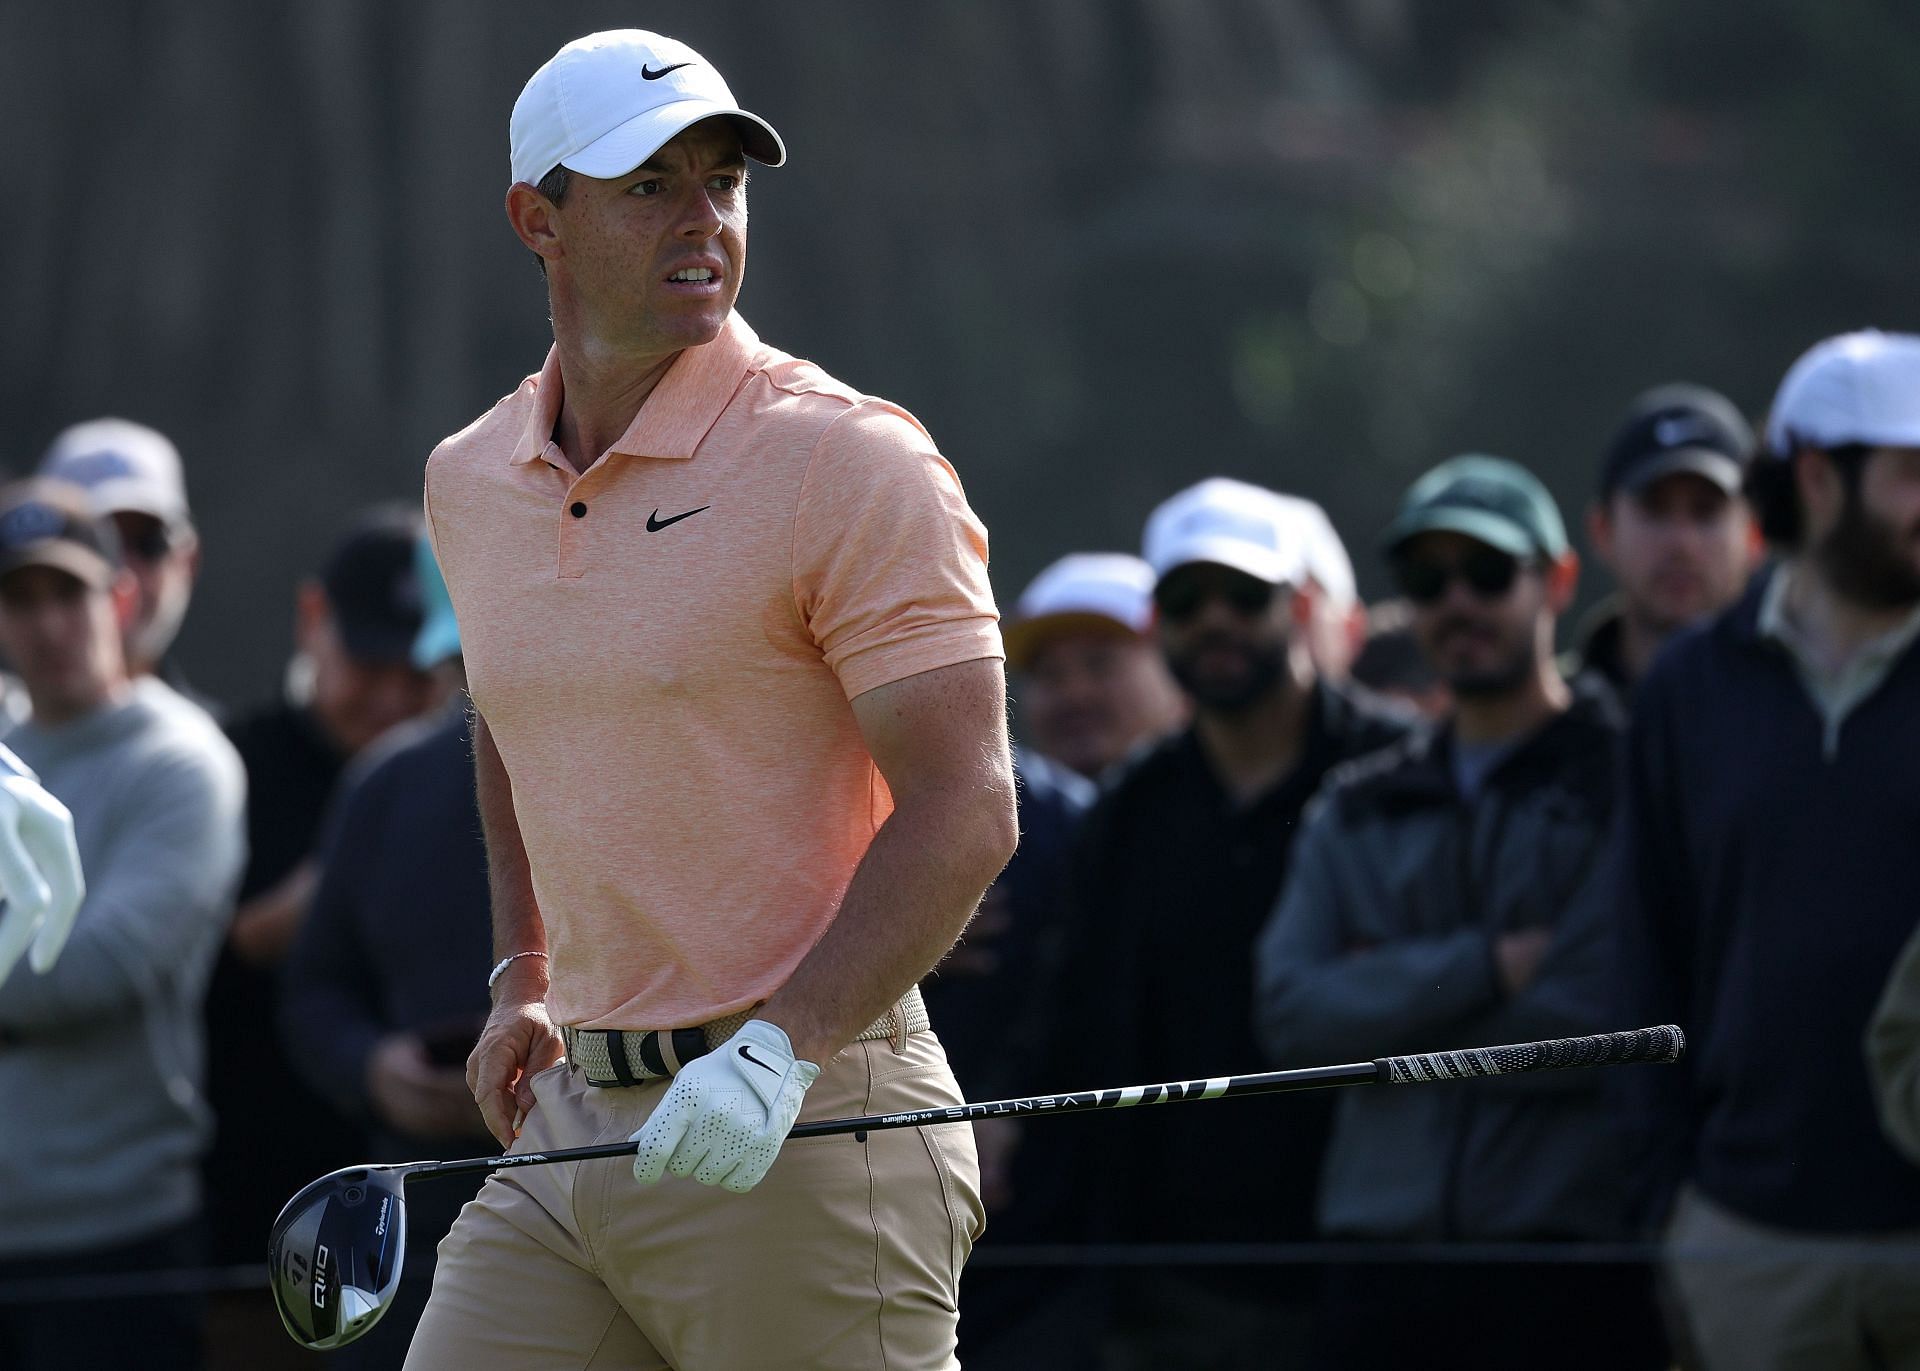 Rory McIlroy is trying to win the Masters